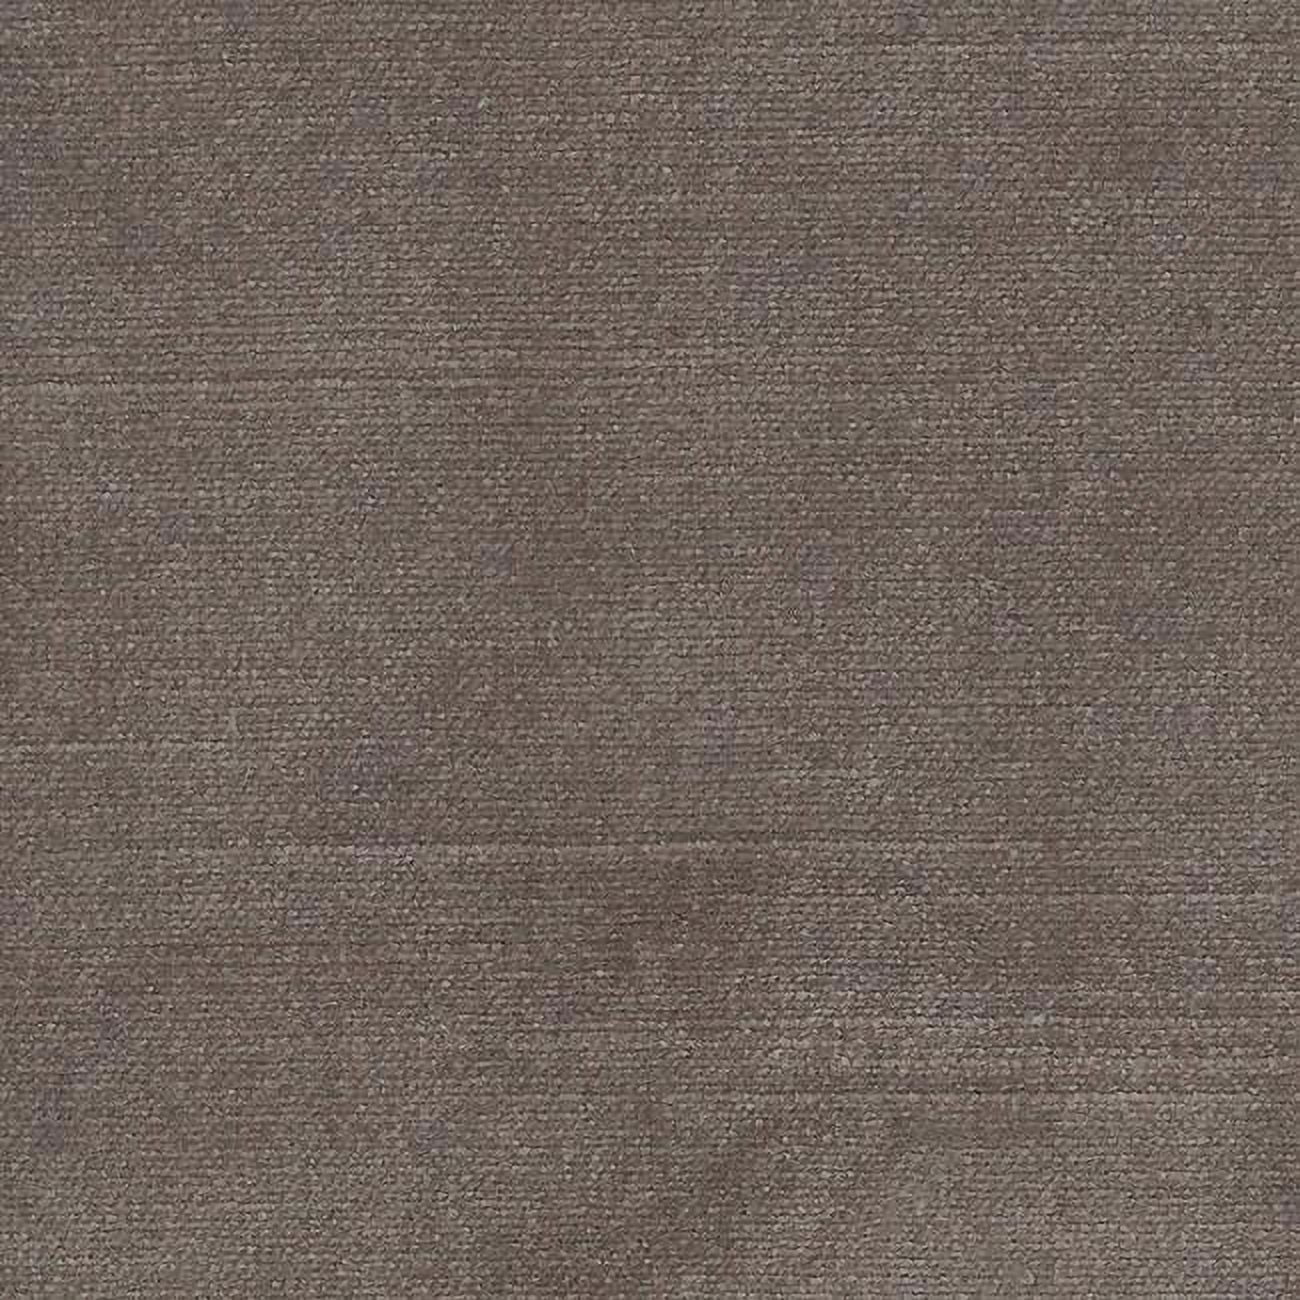 Picture of American Silk 3723 55 in. Brussels Beautifuly Curated Velvet Fabric Cloth, Fawn